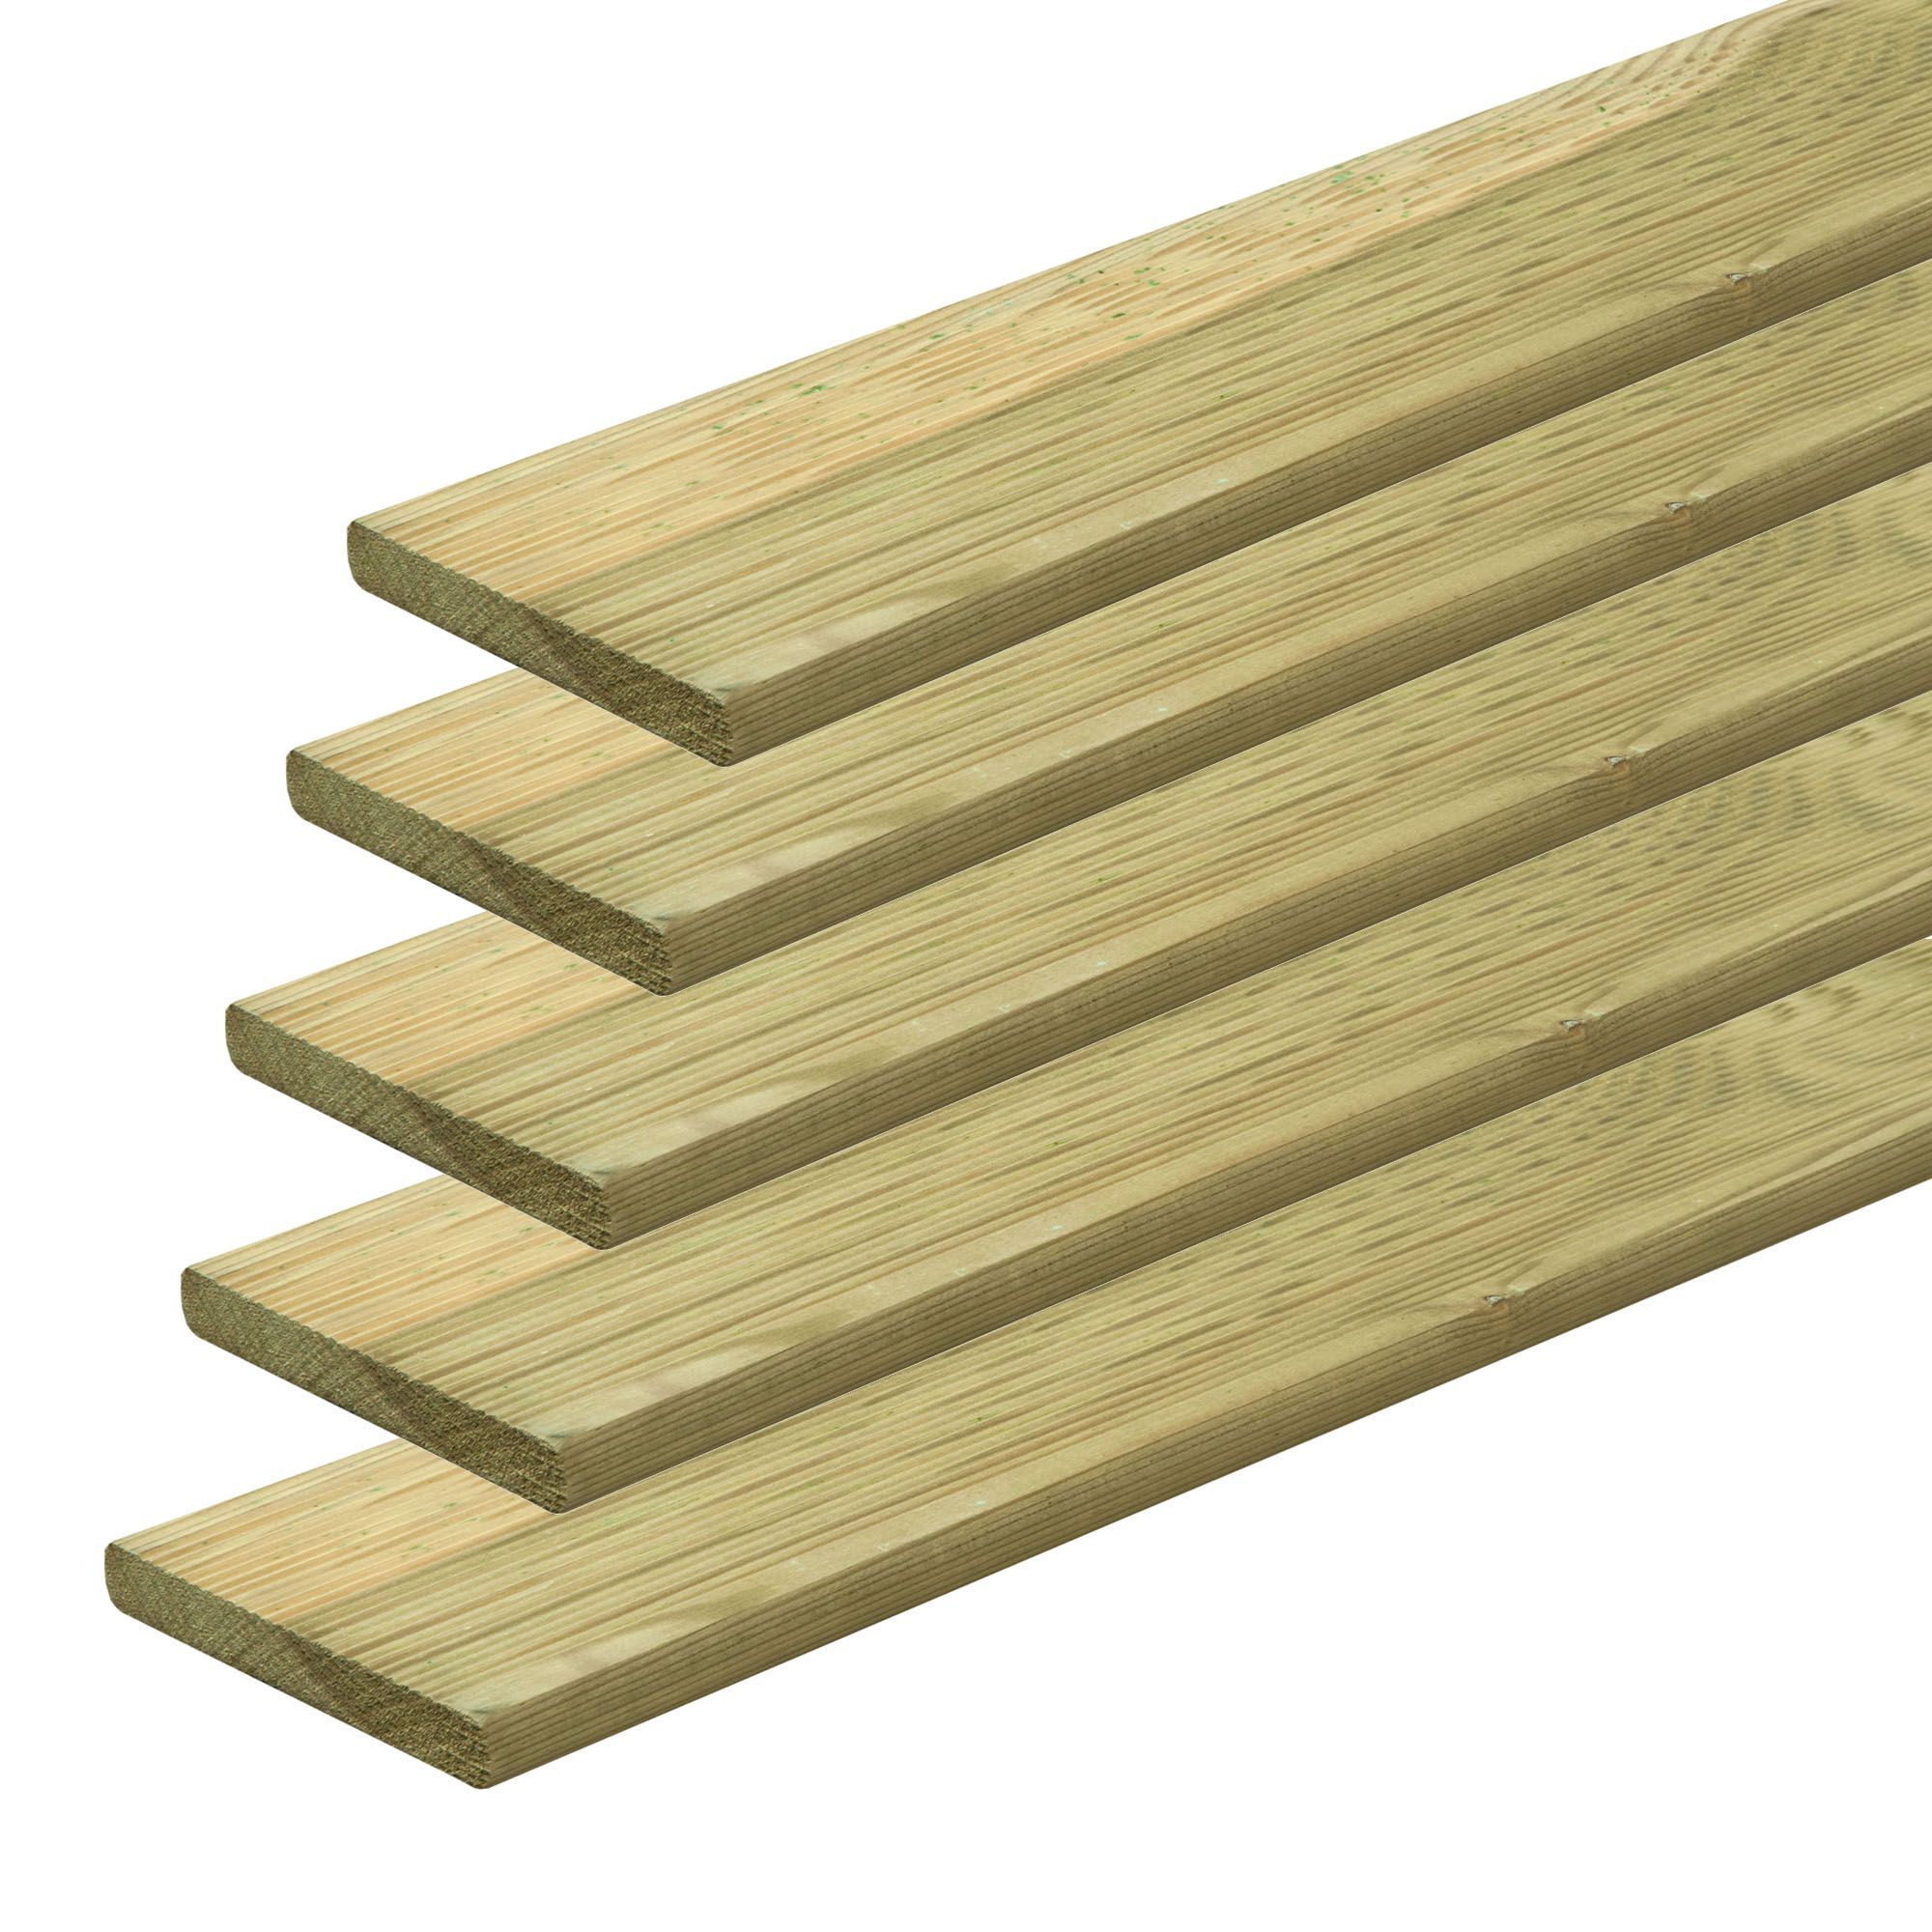 Softwood Deck Board L 2 4m W 95mm T 20mm Of 5 Departments